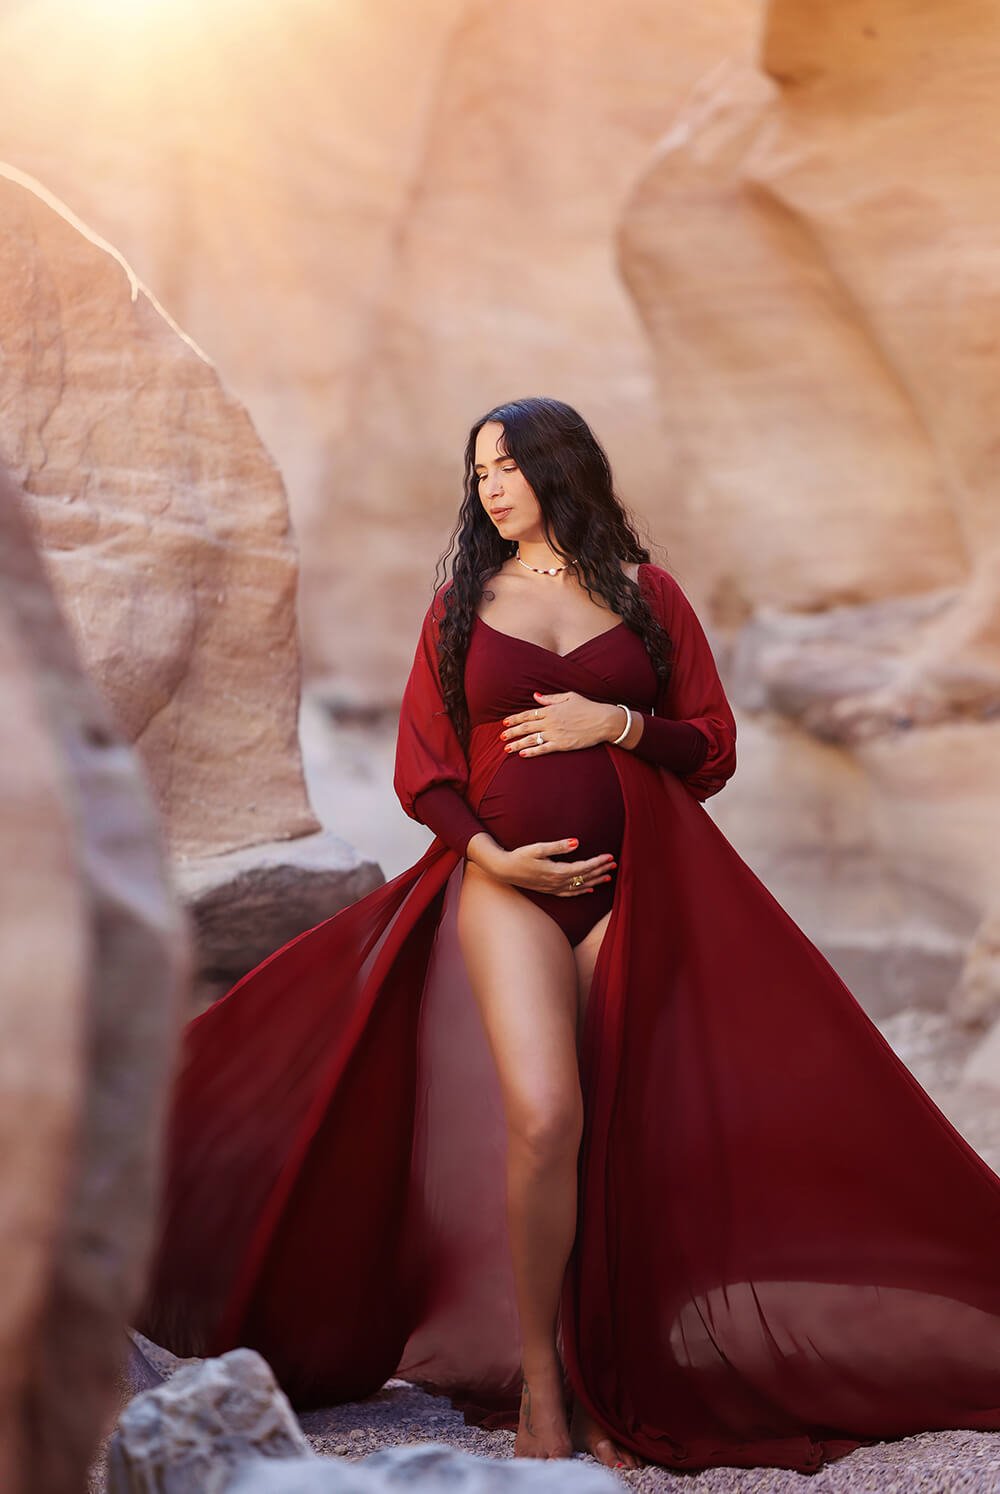 Pregnant model with long curled hair poses outside wearing a maternity outfit made of jersey and chiffon. The dress color is bordeaux and it features an adjustable sweetheart neckline and long chiffon bishop sleeves with jersey manchettes. the chiffon skirt has a split on the middle and a jersey bodysuit can be seen underneath.